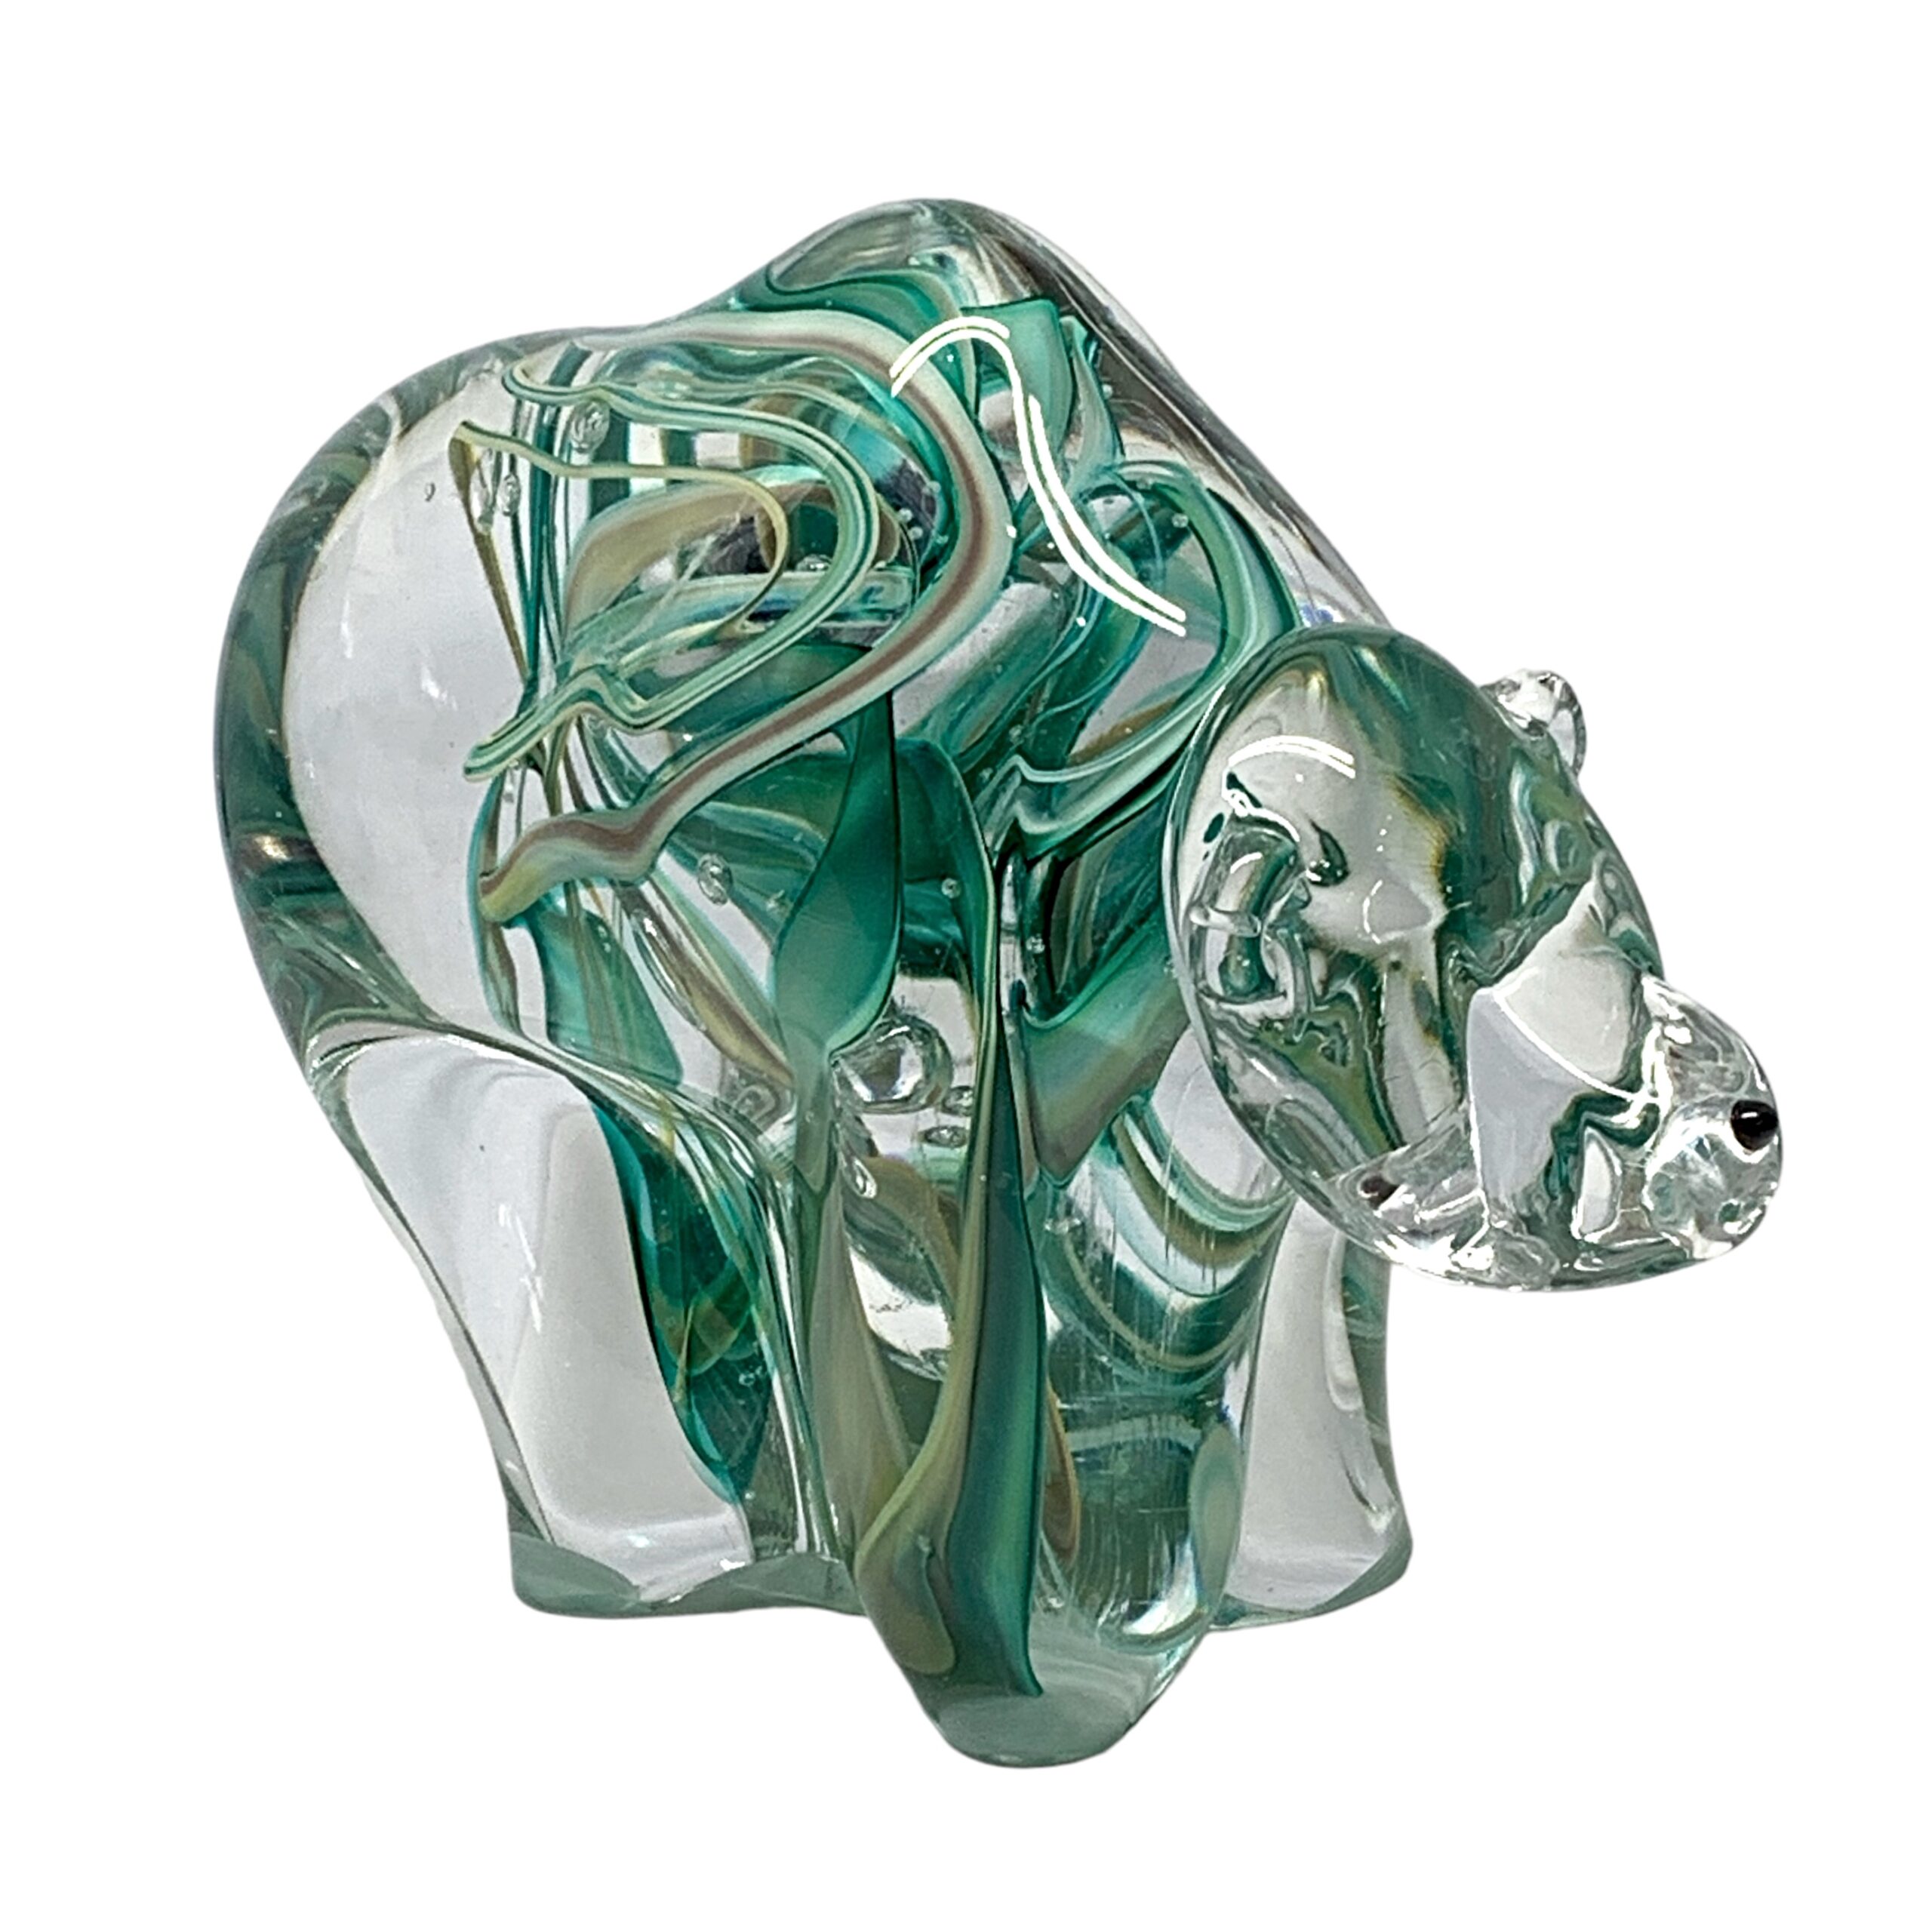 Galaxy Bear 10, blown glass bear by Hayden MacRae at Effusion Art Gallery in Invermere, BC